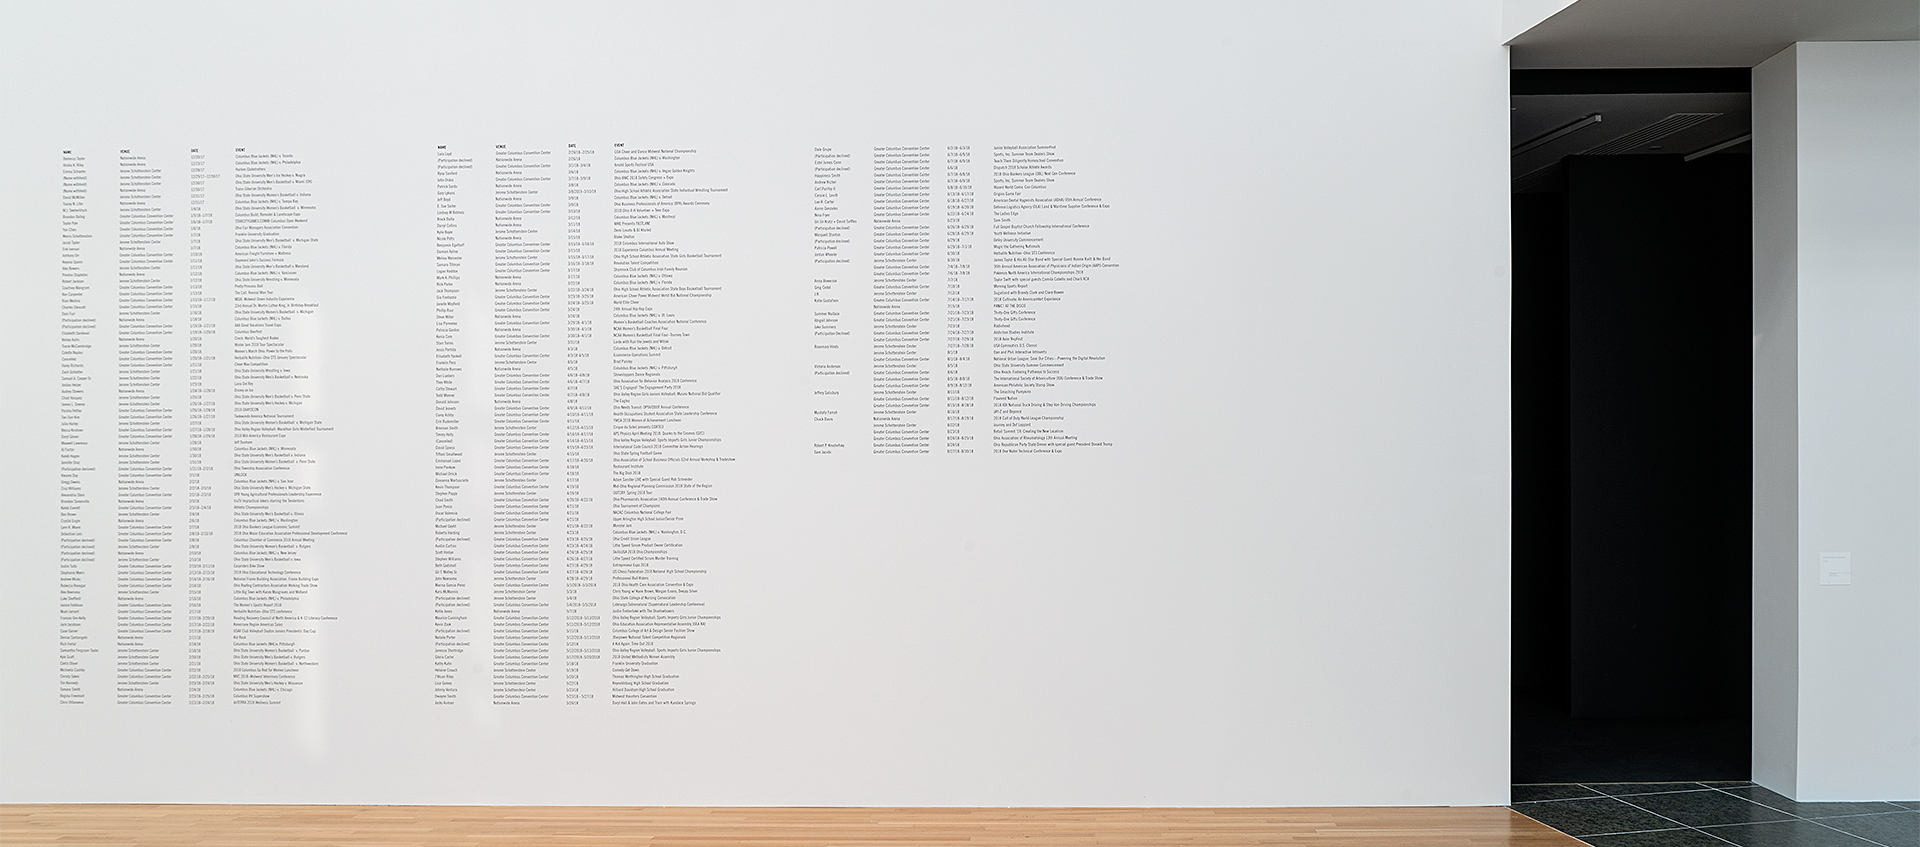 A list of names on a white wall in the Wexner Center galleries